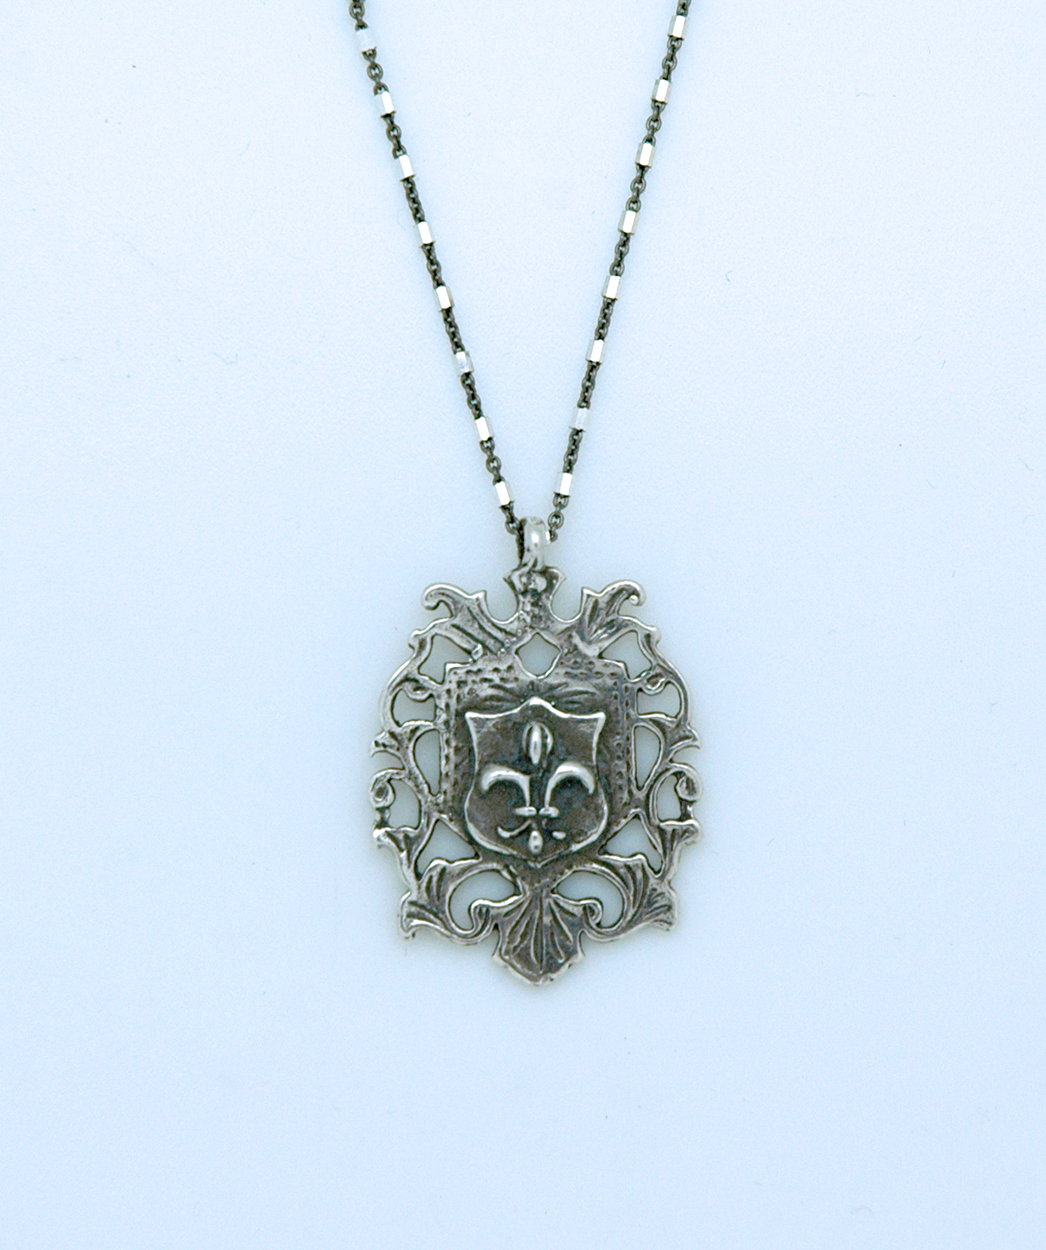 SSN18 - Sterling Silver Necklace, Fleur de Lis Medal, 18 in. Sterling Silver Chain